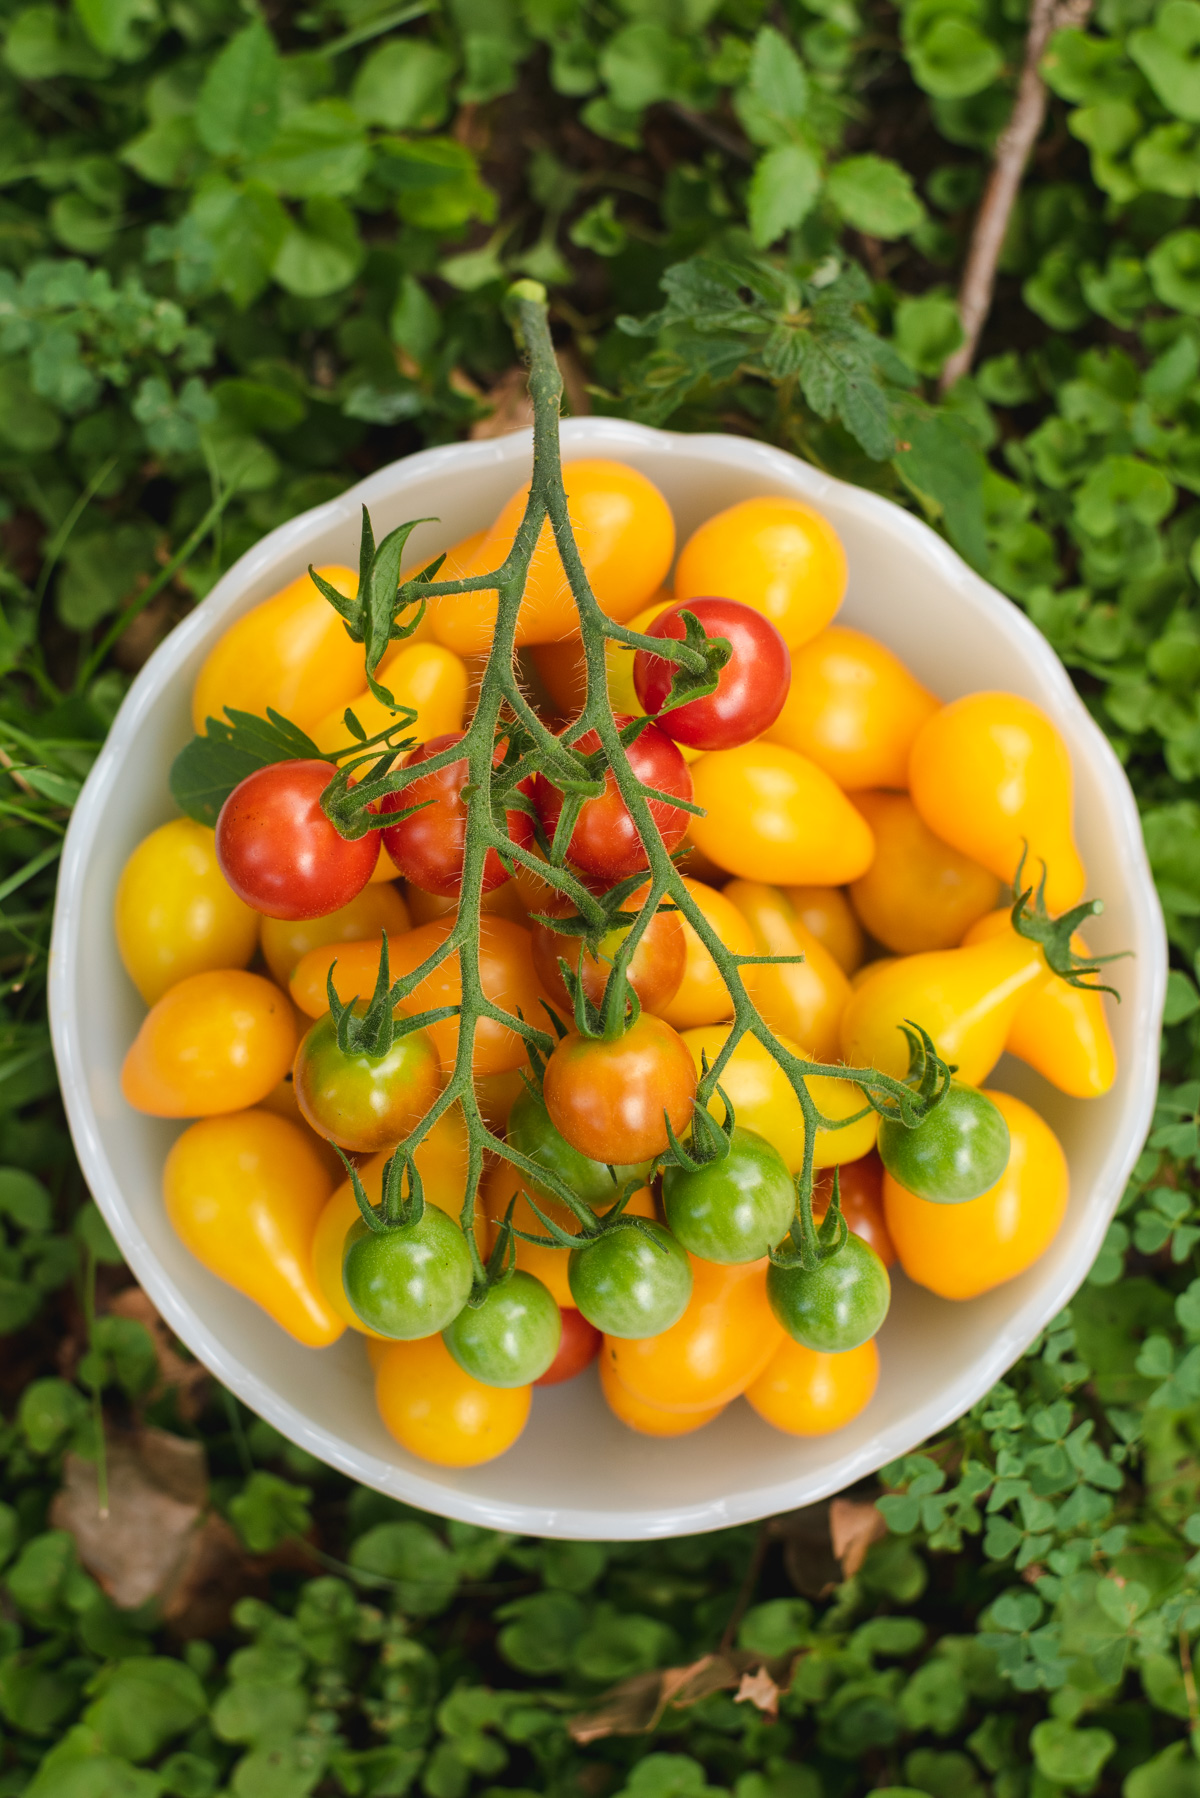 Yellow grape tomatoes and cherry tomatoes in white bowl.